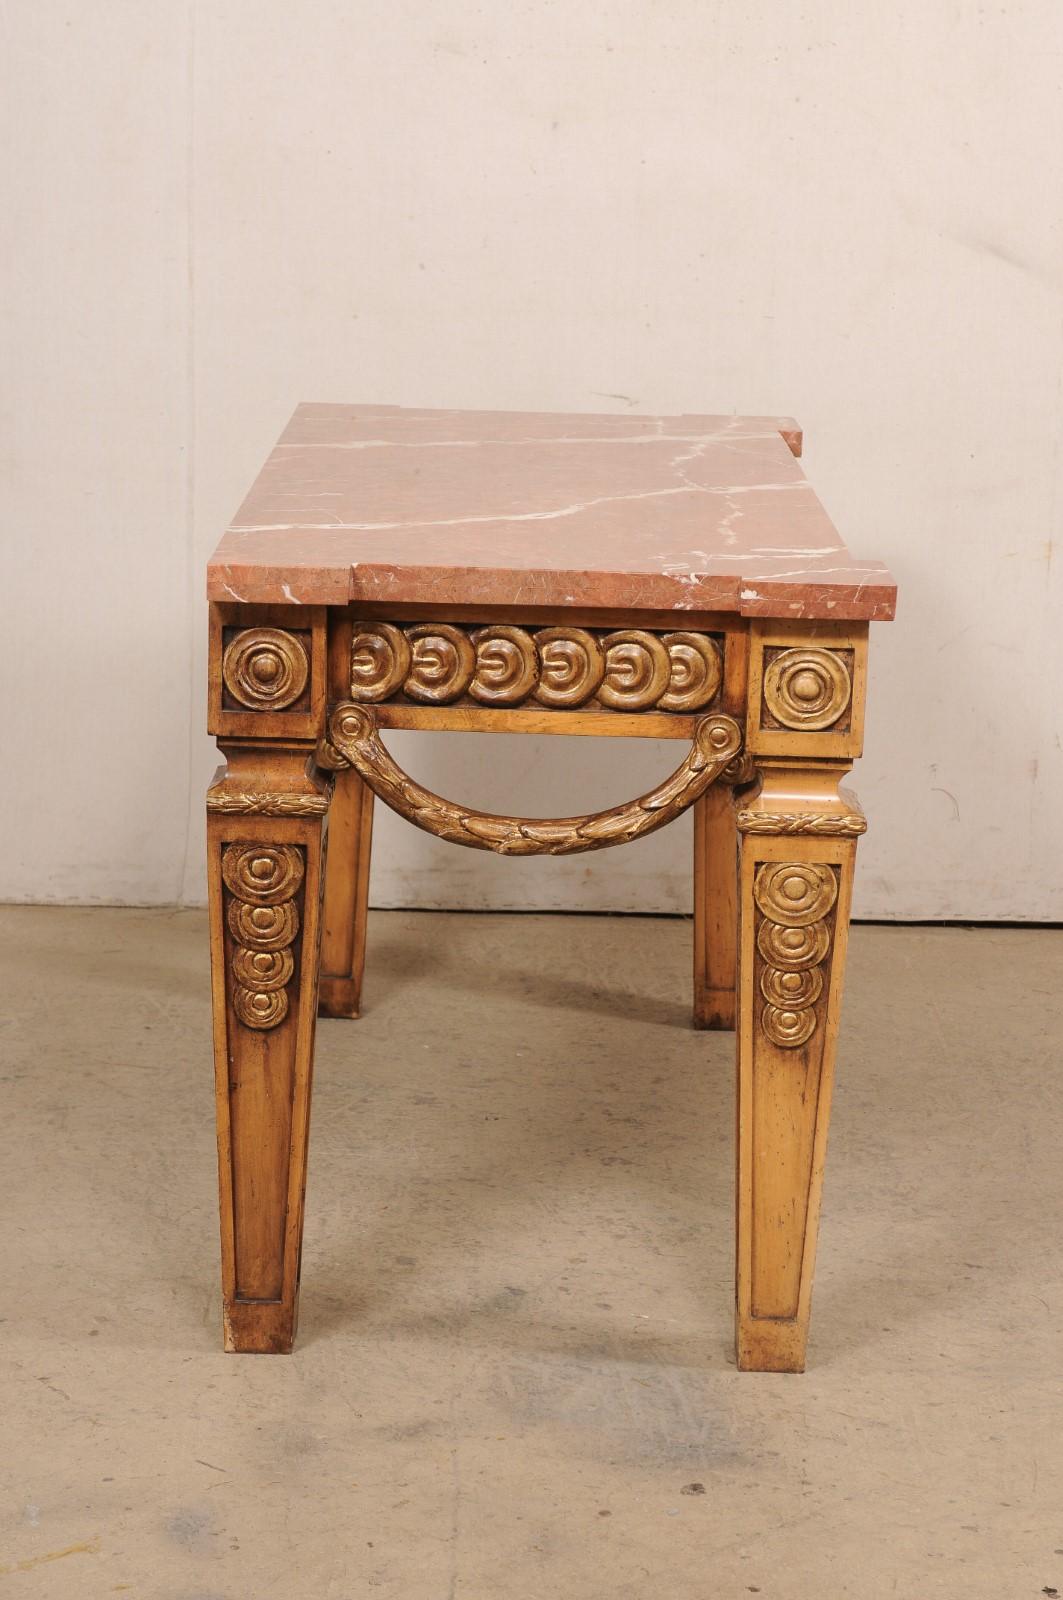 20th Century A Unique Carved Wood & Marble Top Console Table w/Bold Robust Presence, 5 Ft  For Sale